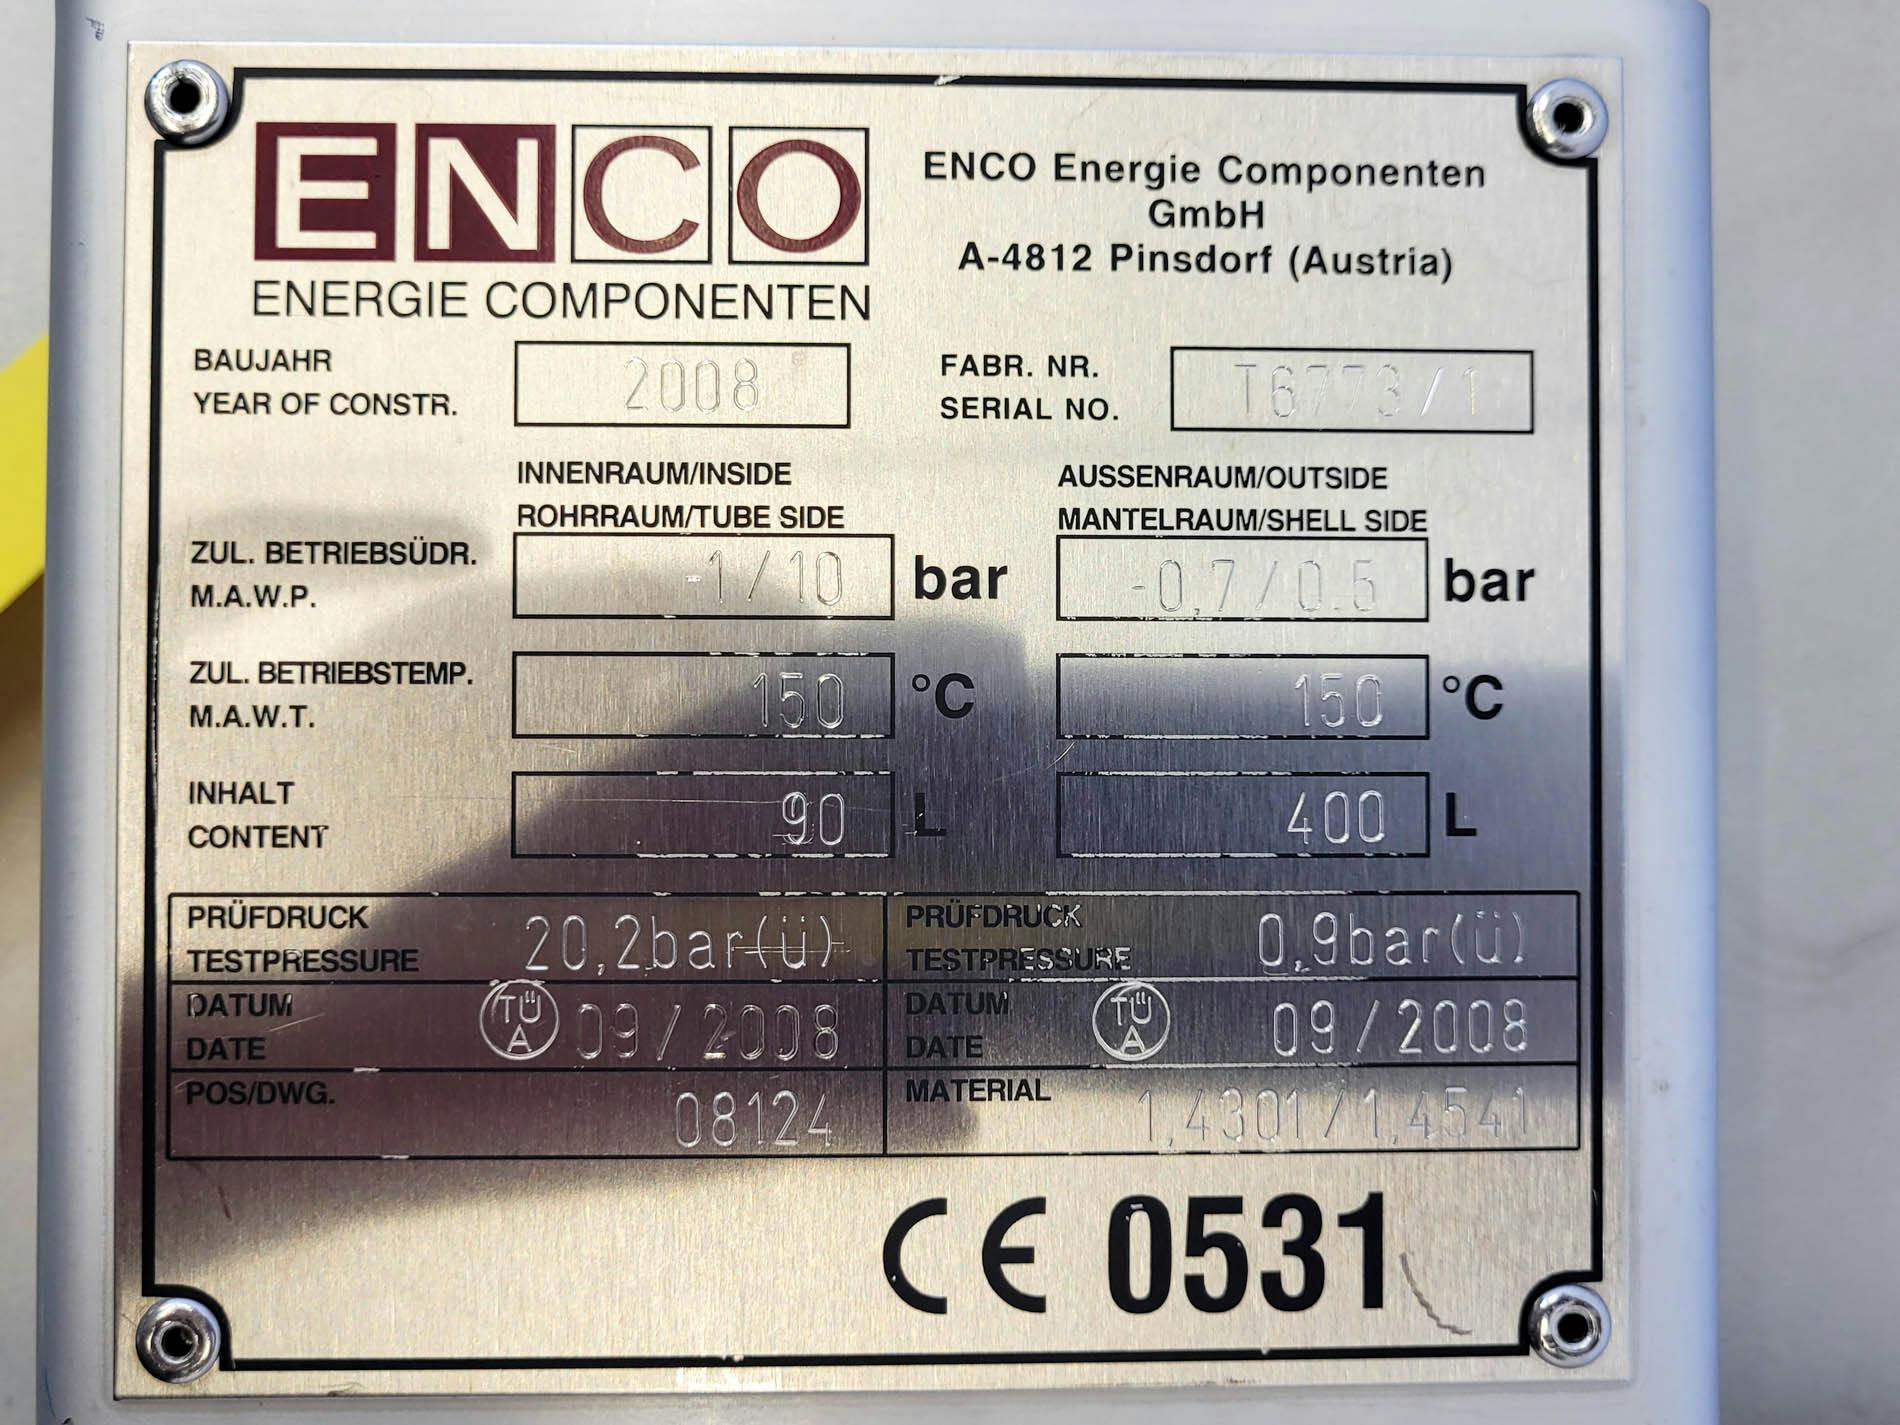 Enco "Finned / Rippenrohr" - Shell and tube heat exchanger - image 7